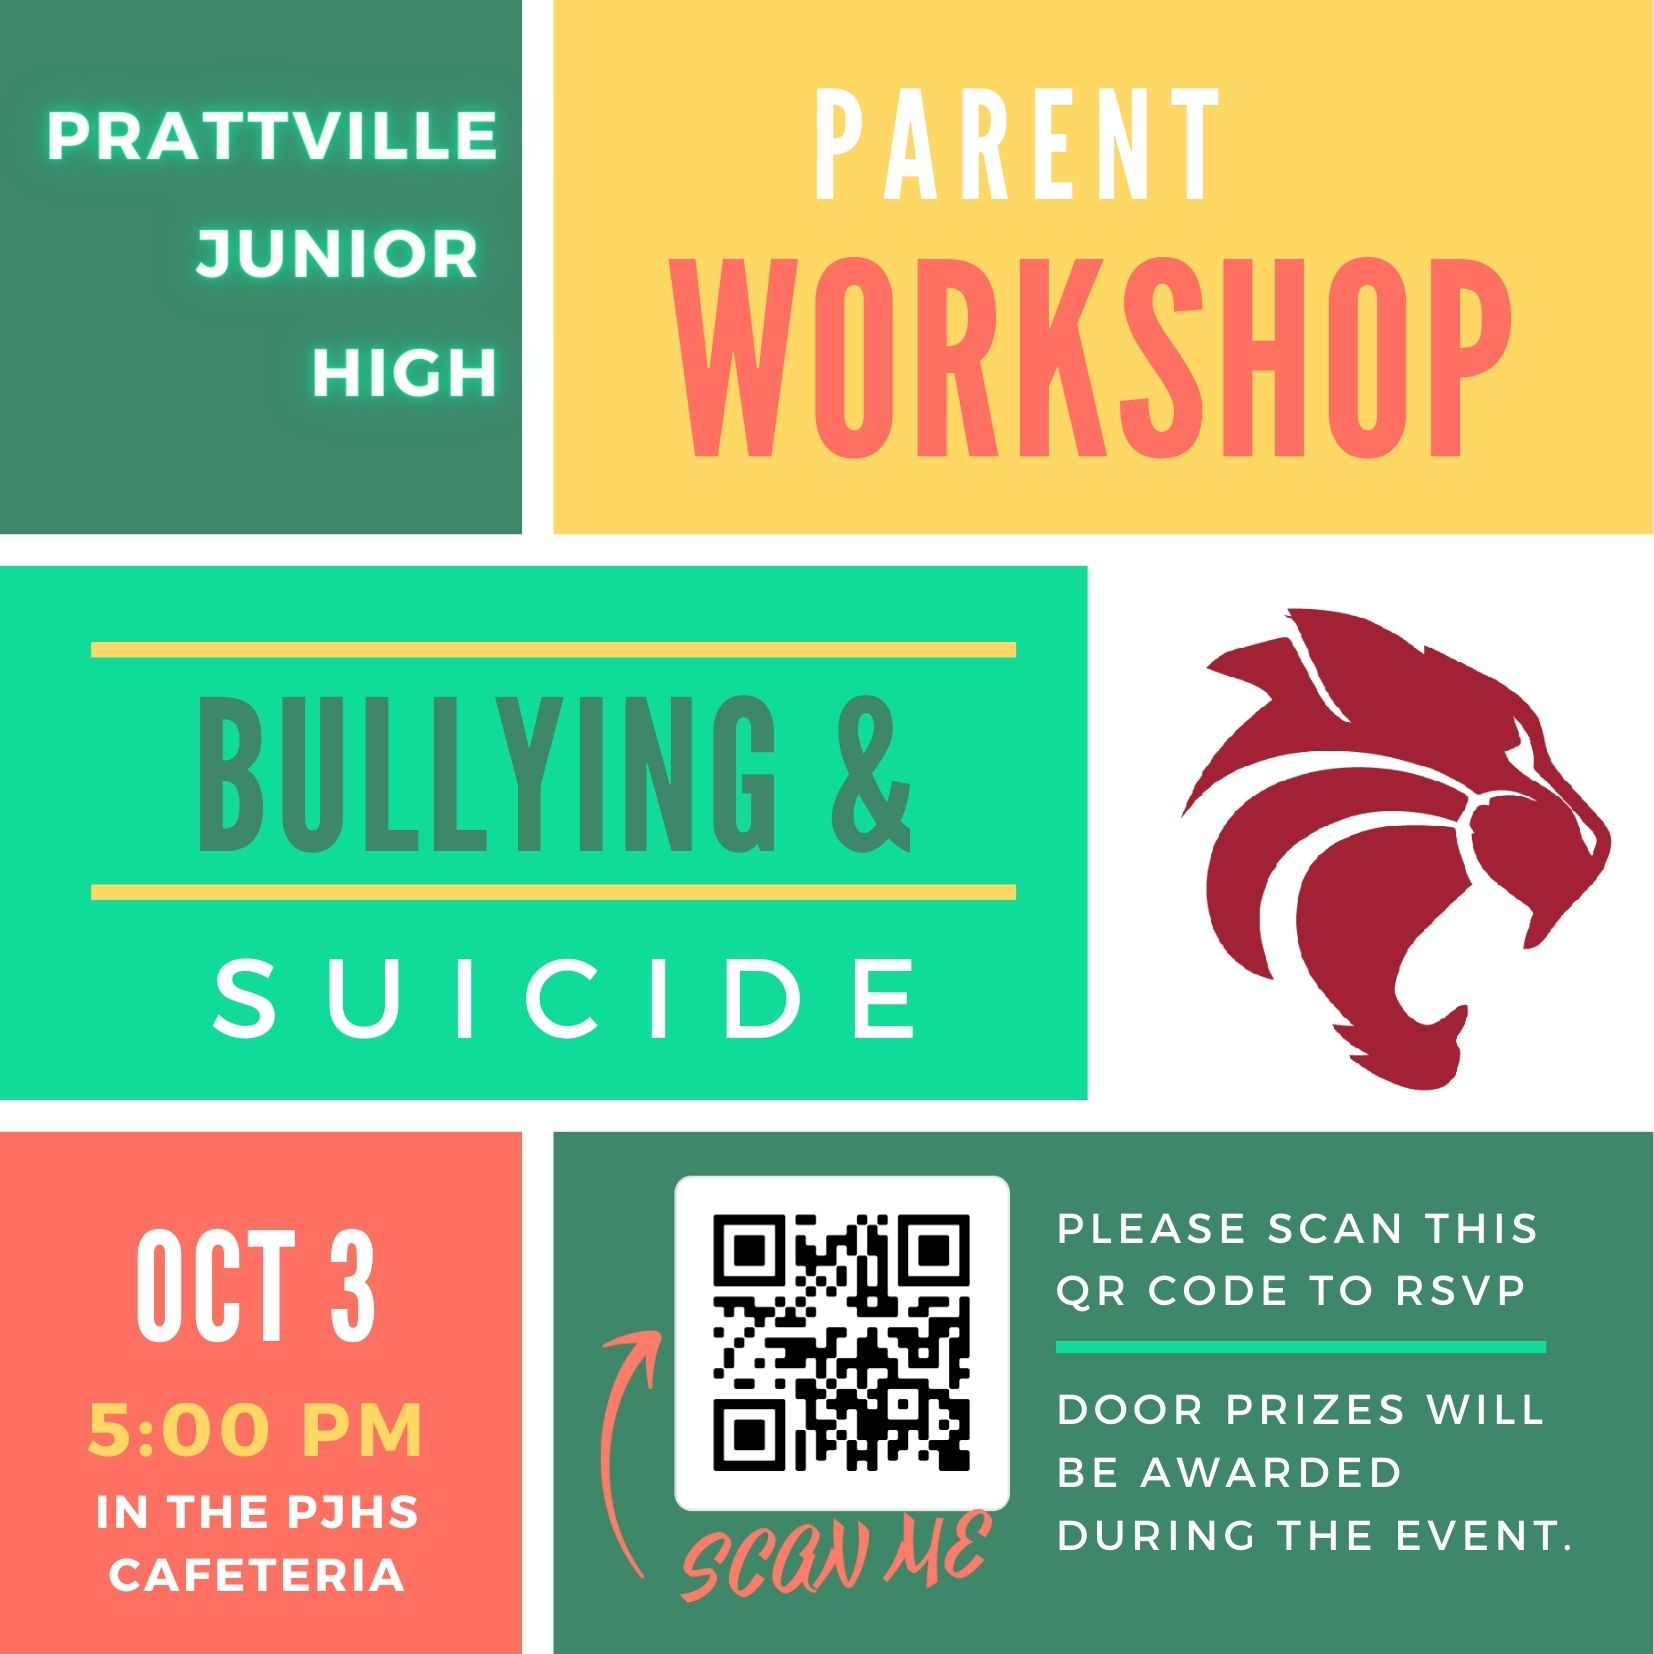 October parent workshop poster for bullying and suicide prevention awareness. October 3rd 5 pm at pjhs door prizes will be awarded